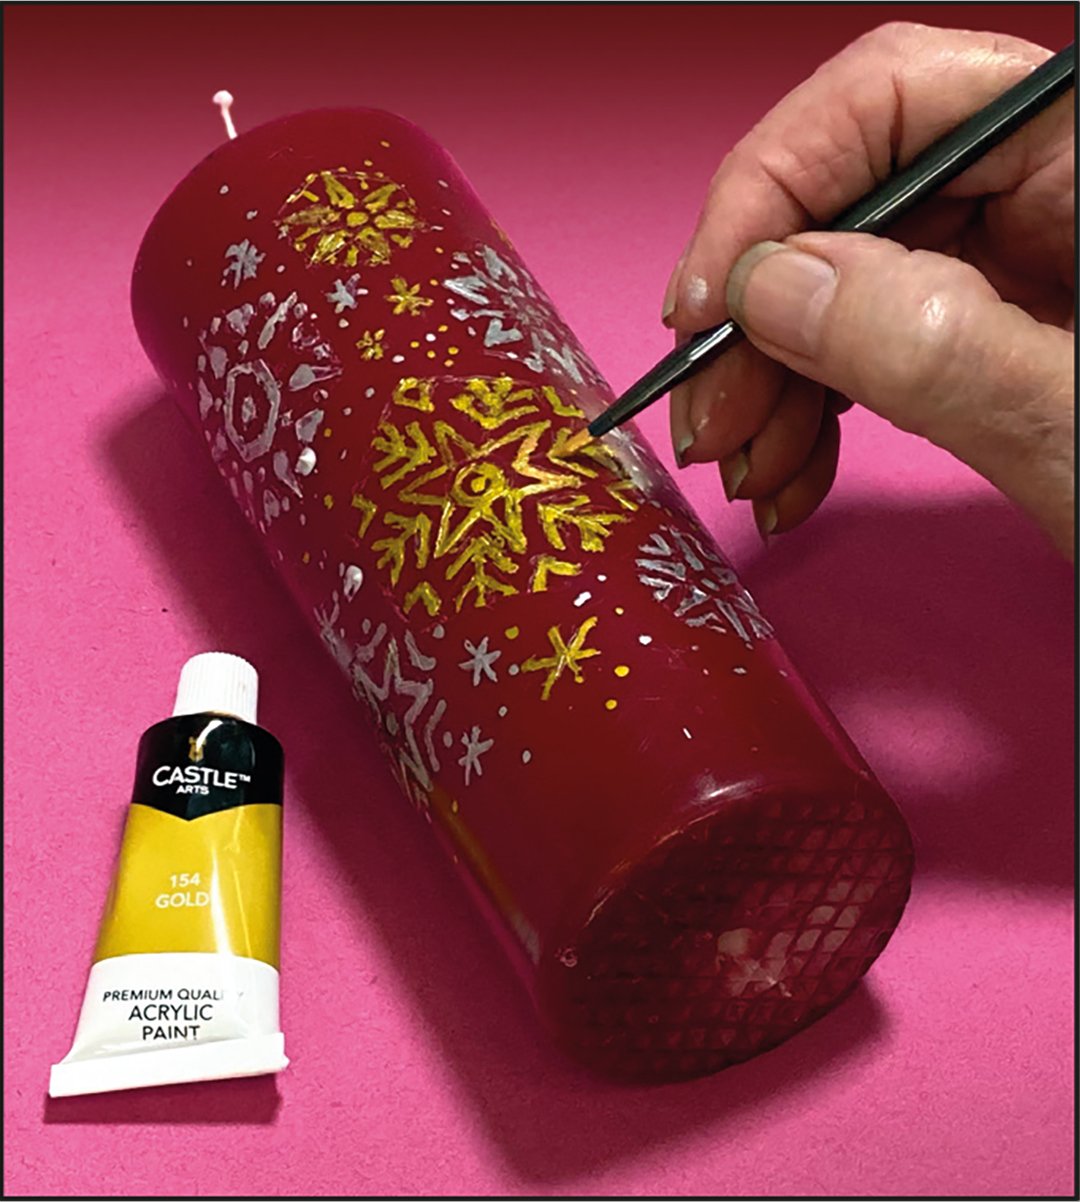 An artist adding gold acrylic paint to their Christmas candle.